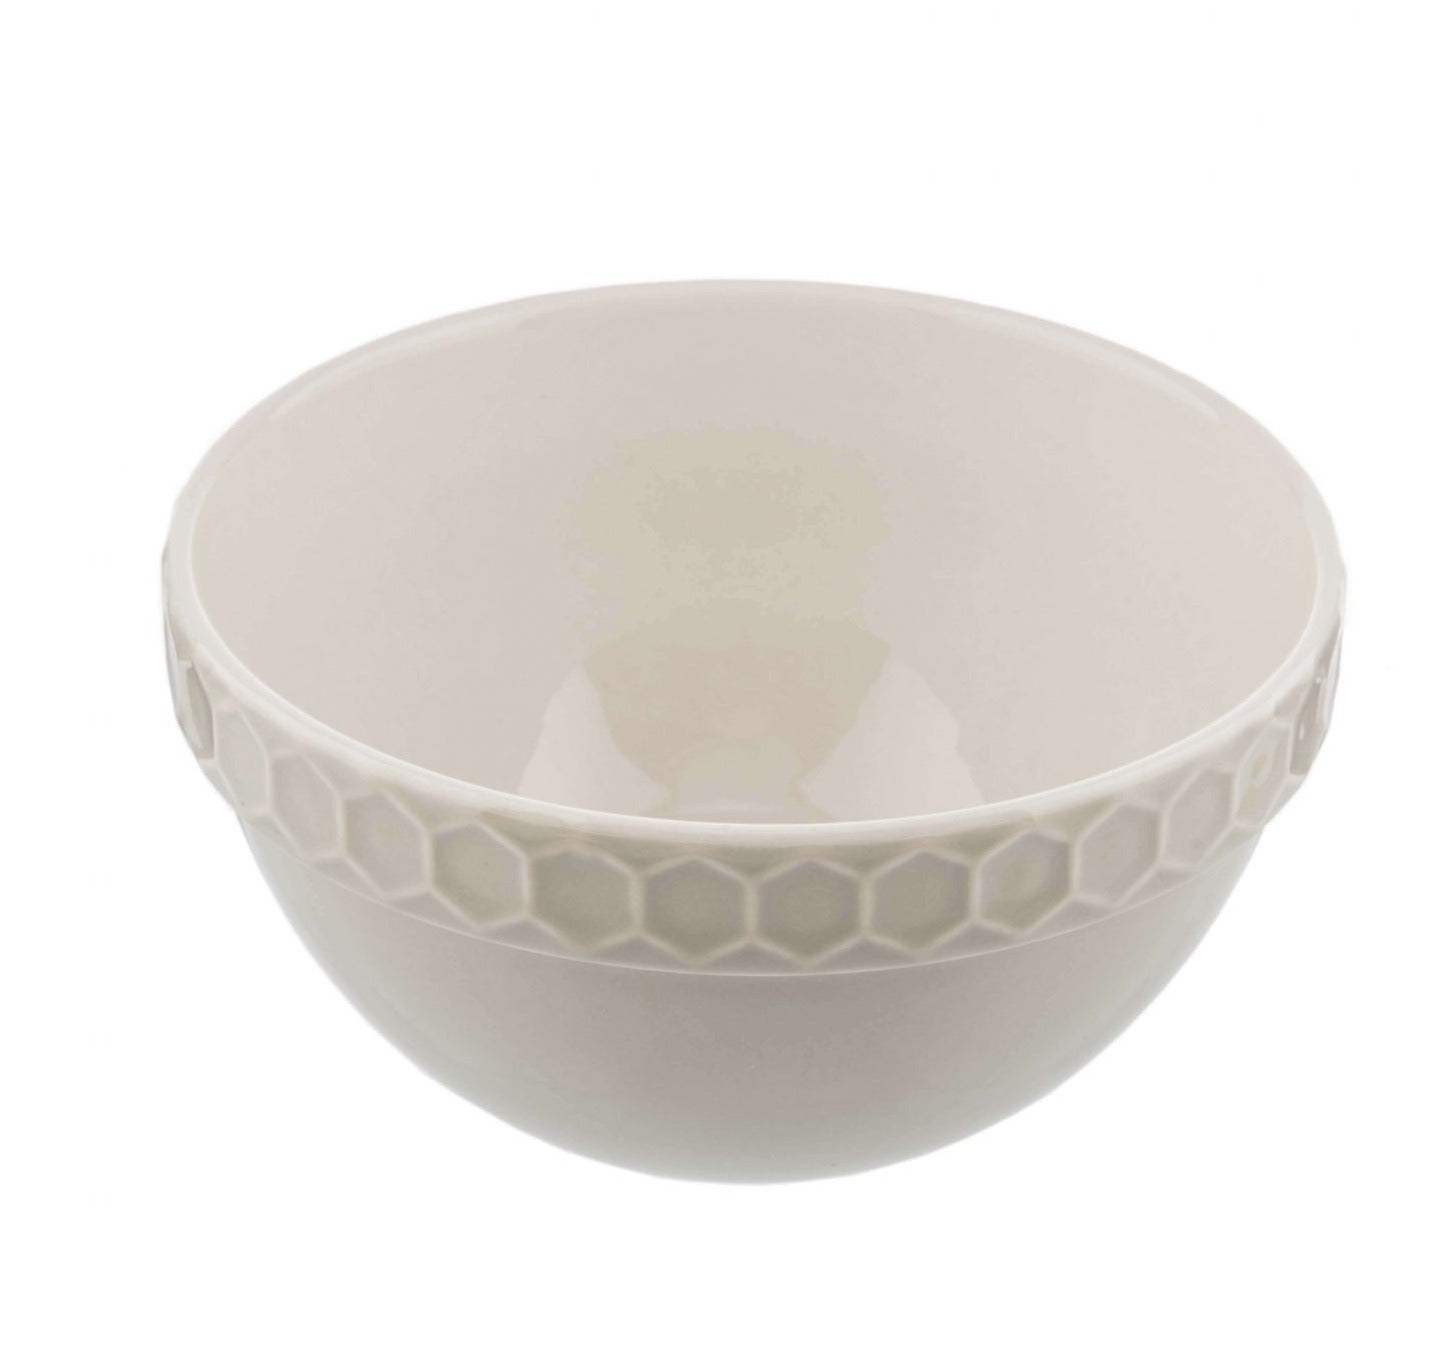 Kitchen Pantry – 600ml Pudding Bowl - The Cooks Cupboard Ltd